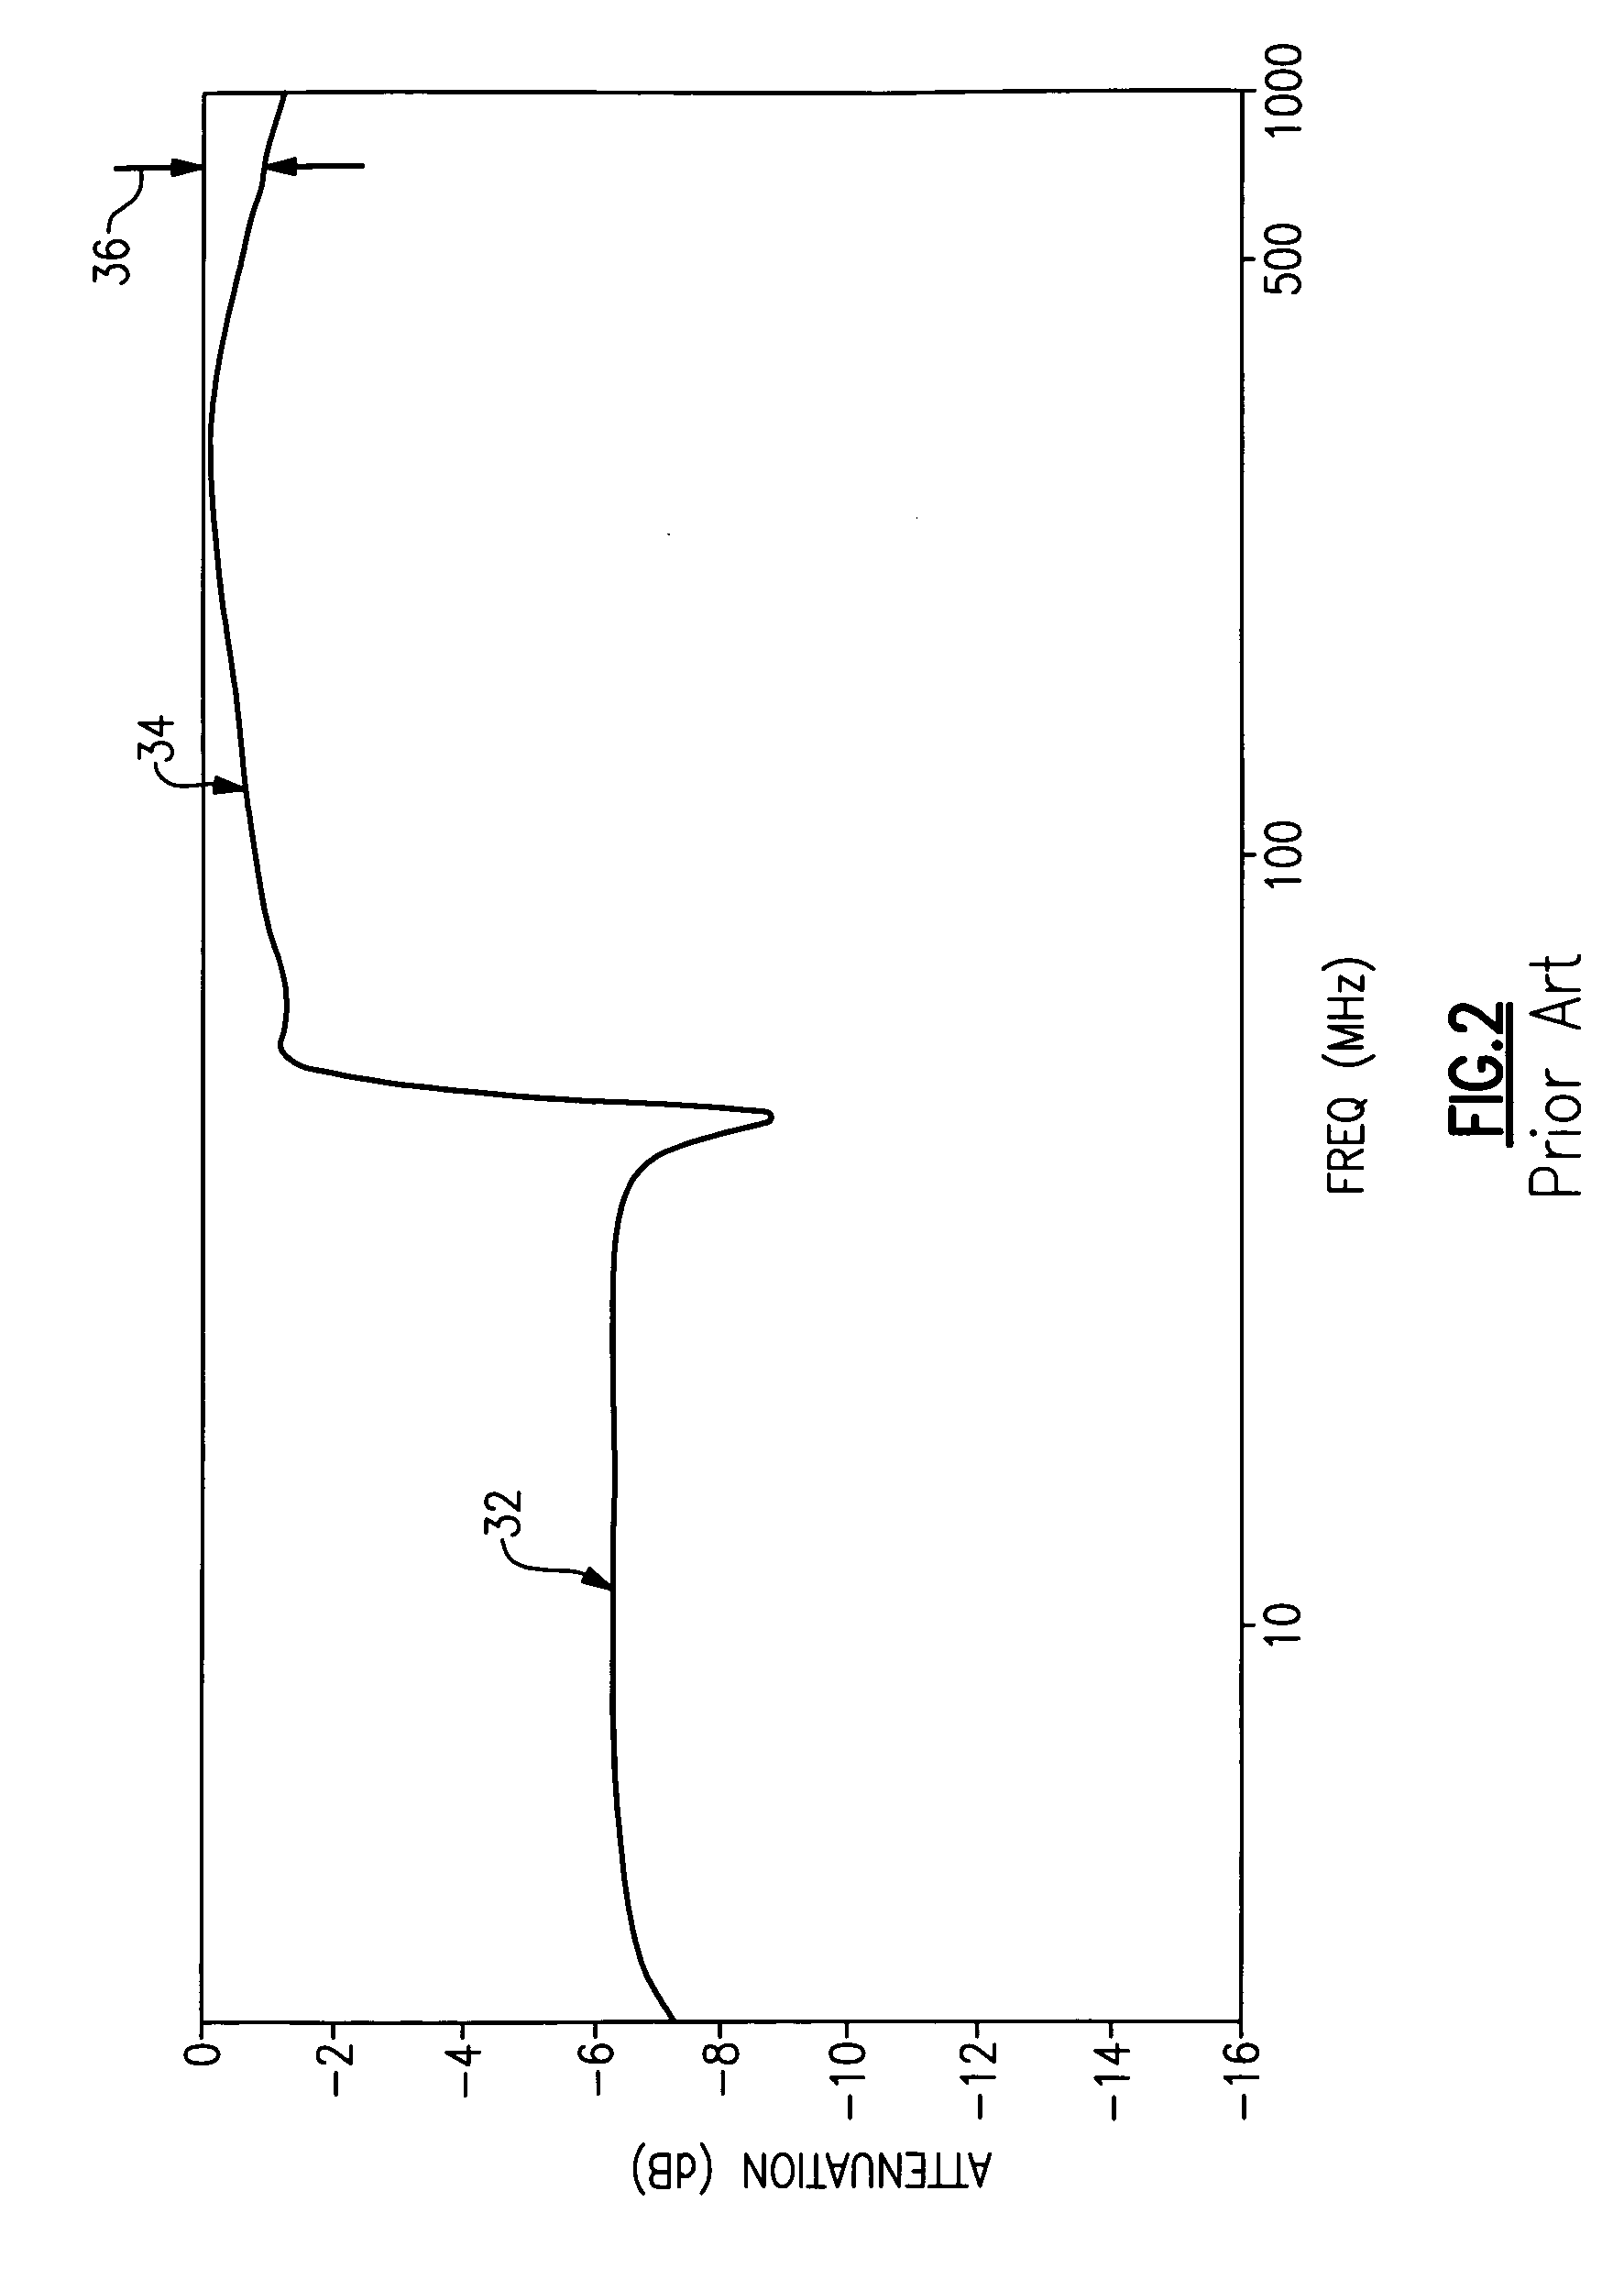 Step attenuator circuit with improved insertion loss